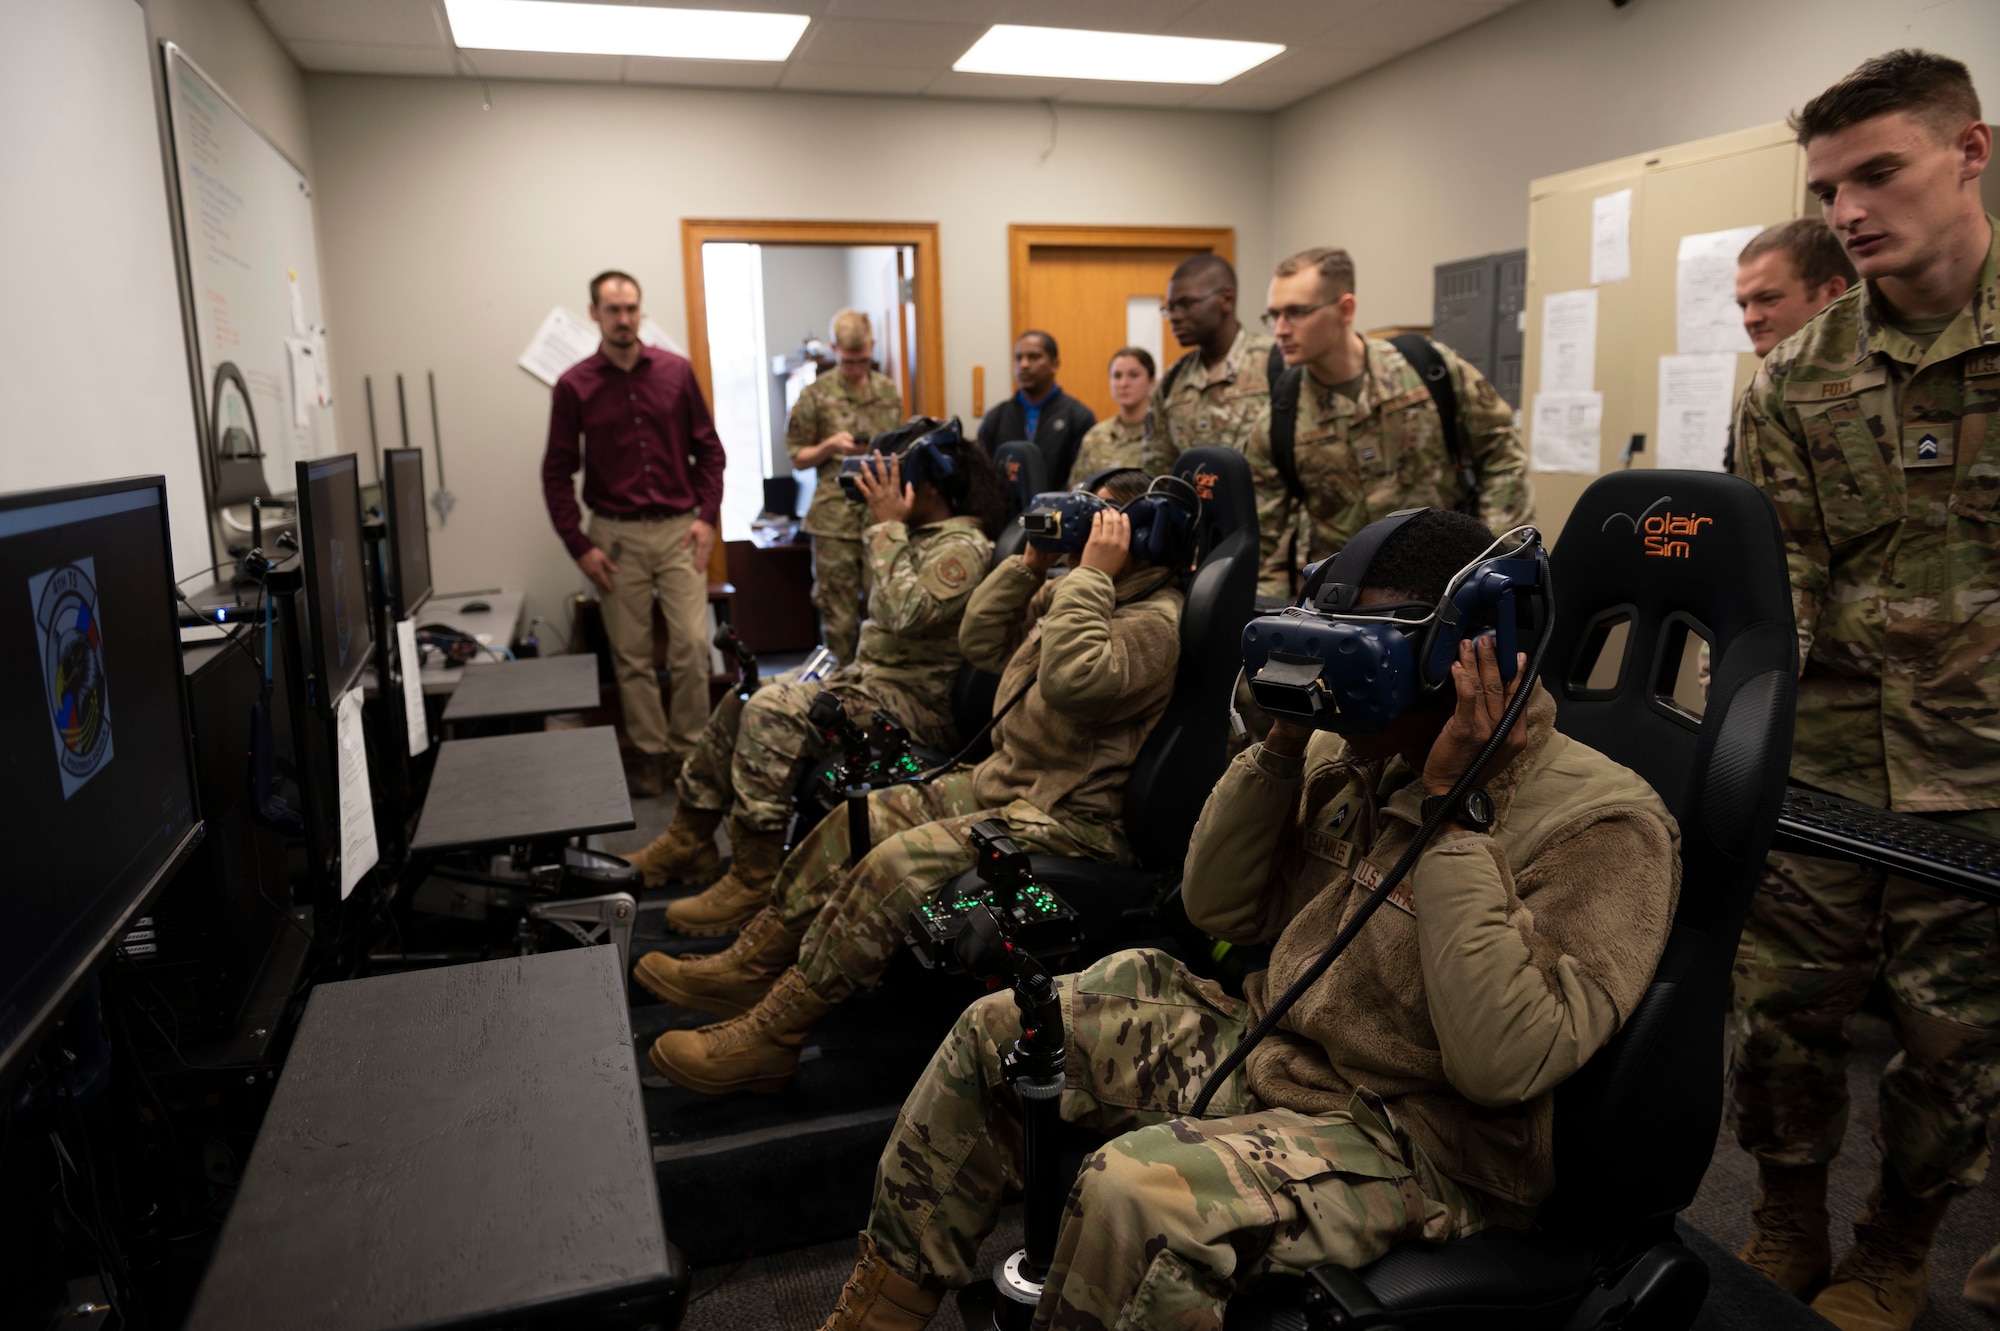 Air Force ROTC cadets from North Carolina Agricultural and Technical State University, Fayetteville State University and East Carolina University use a virtual reality system during Strive 4th: A Project Tuskegee and AIM Initiative at Seymour Johnson Air Force Base, North Carolina, November 4, 2022.